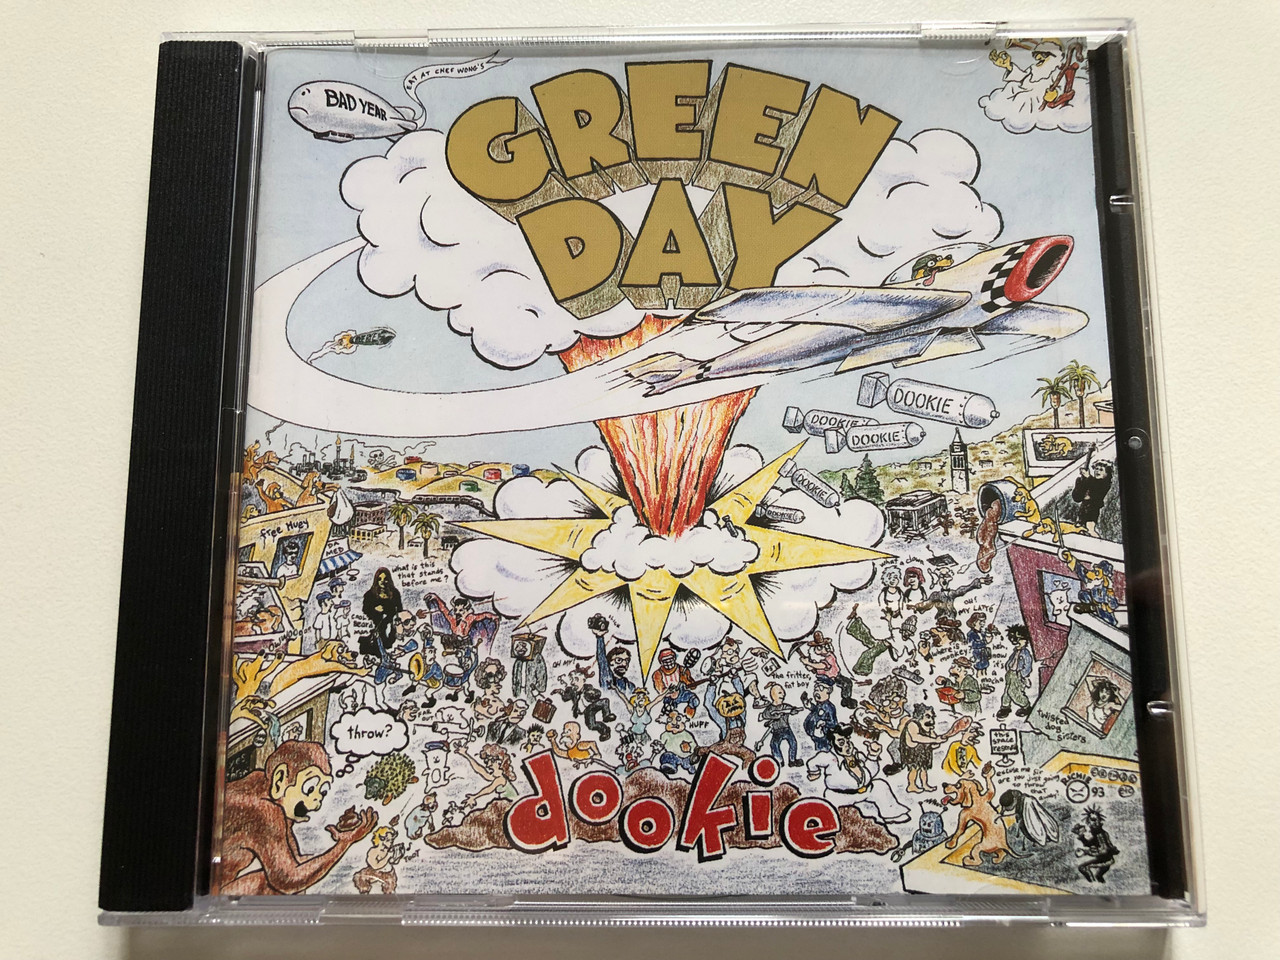 https://cdn10.bigcommerce.com/s-62bdpkt7pb/products/0/images/309969/Green_Day_Dookie_Reprise_Records_Audio_CD_1994_9362-45529-2_1__72310.1699304474.1280.1280.JPG?c=2